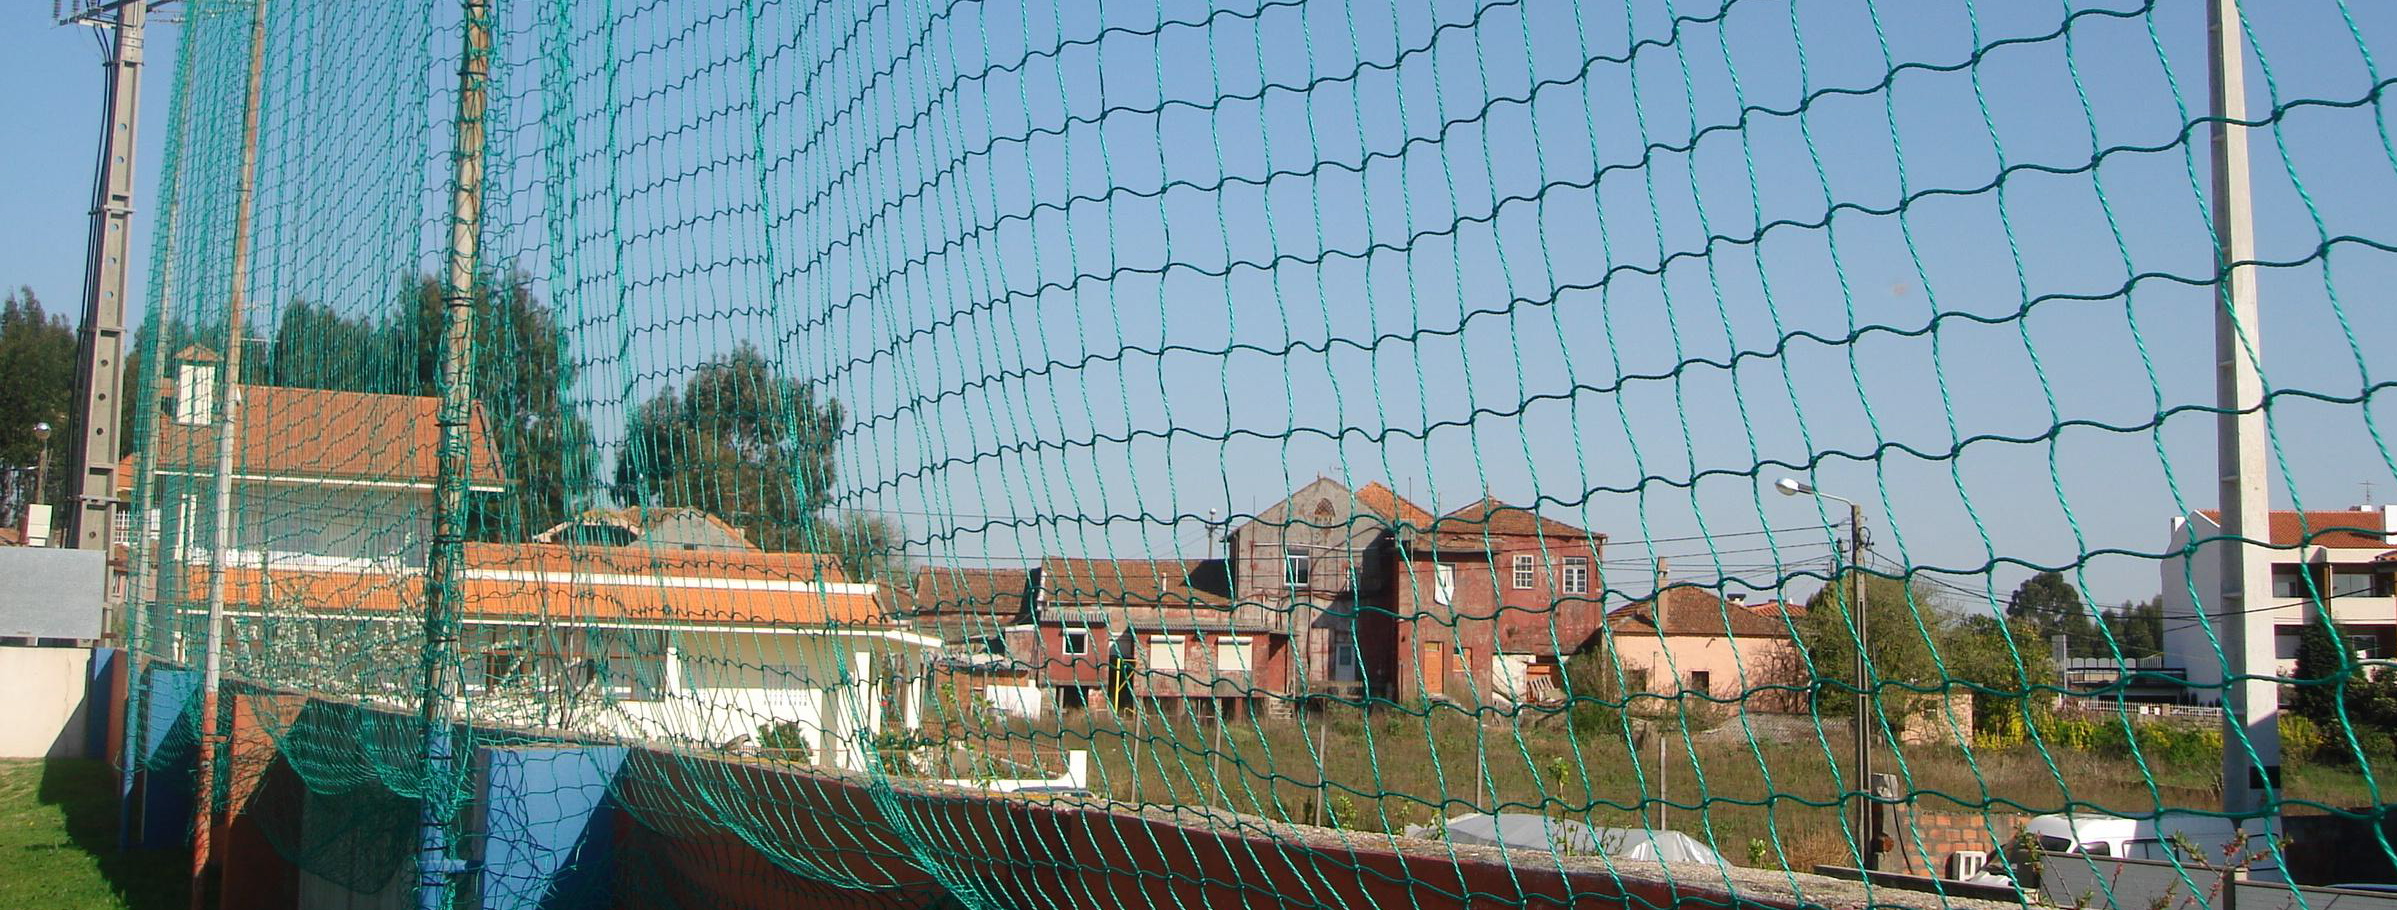 Fencing and Safety Nets